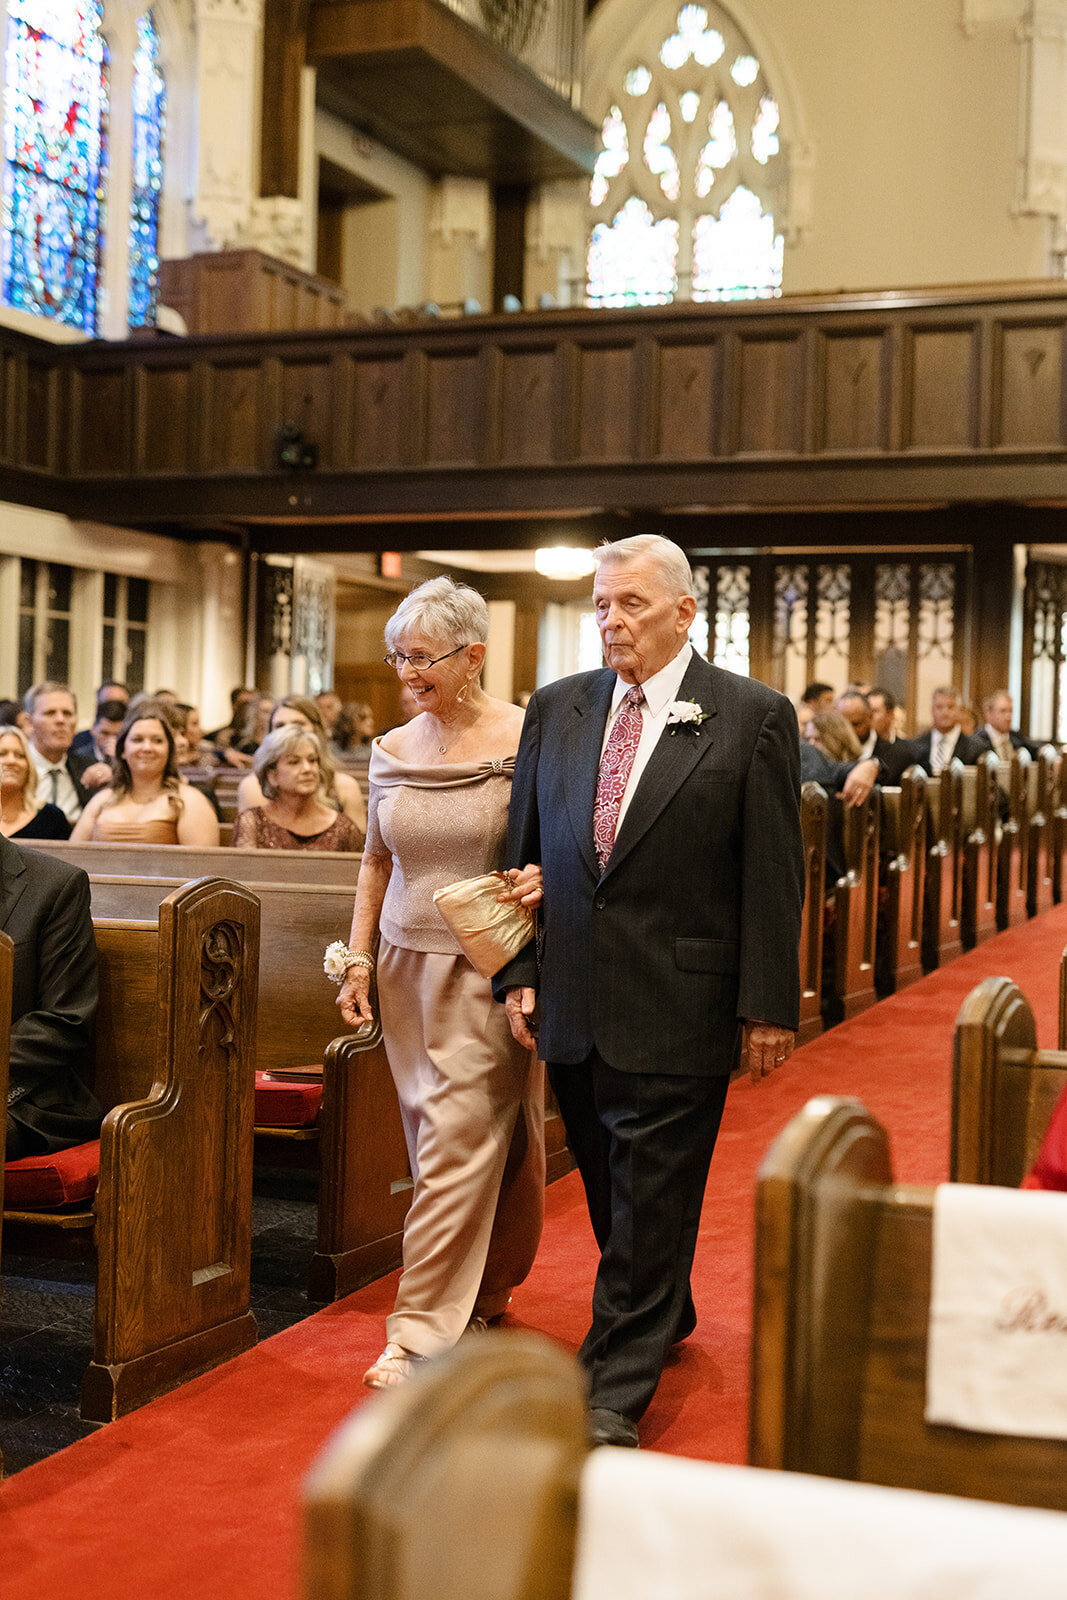 Kylie and Jack at The Grand Hall - Kansas City Wedding Photograpy - Nick and Lexie Photo Film-556